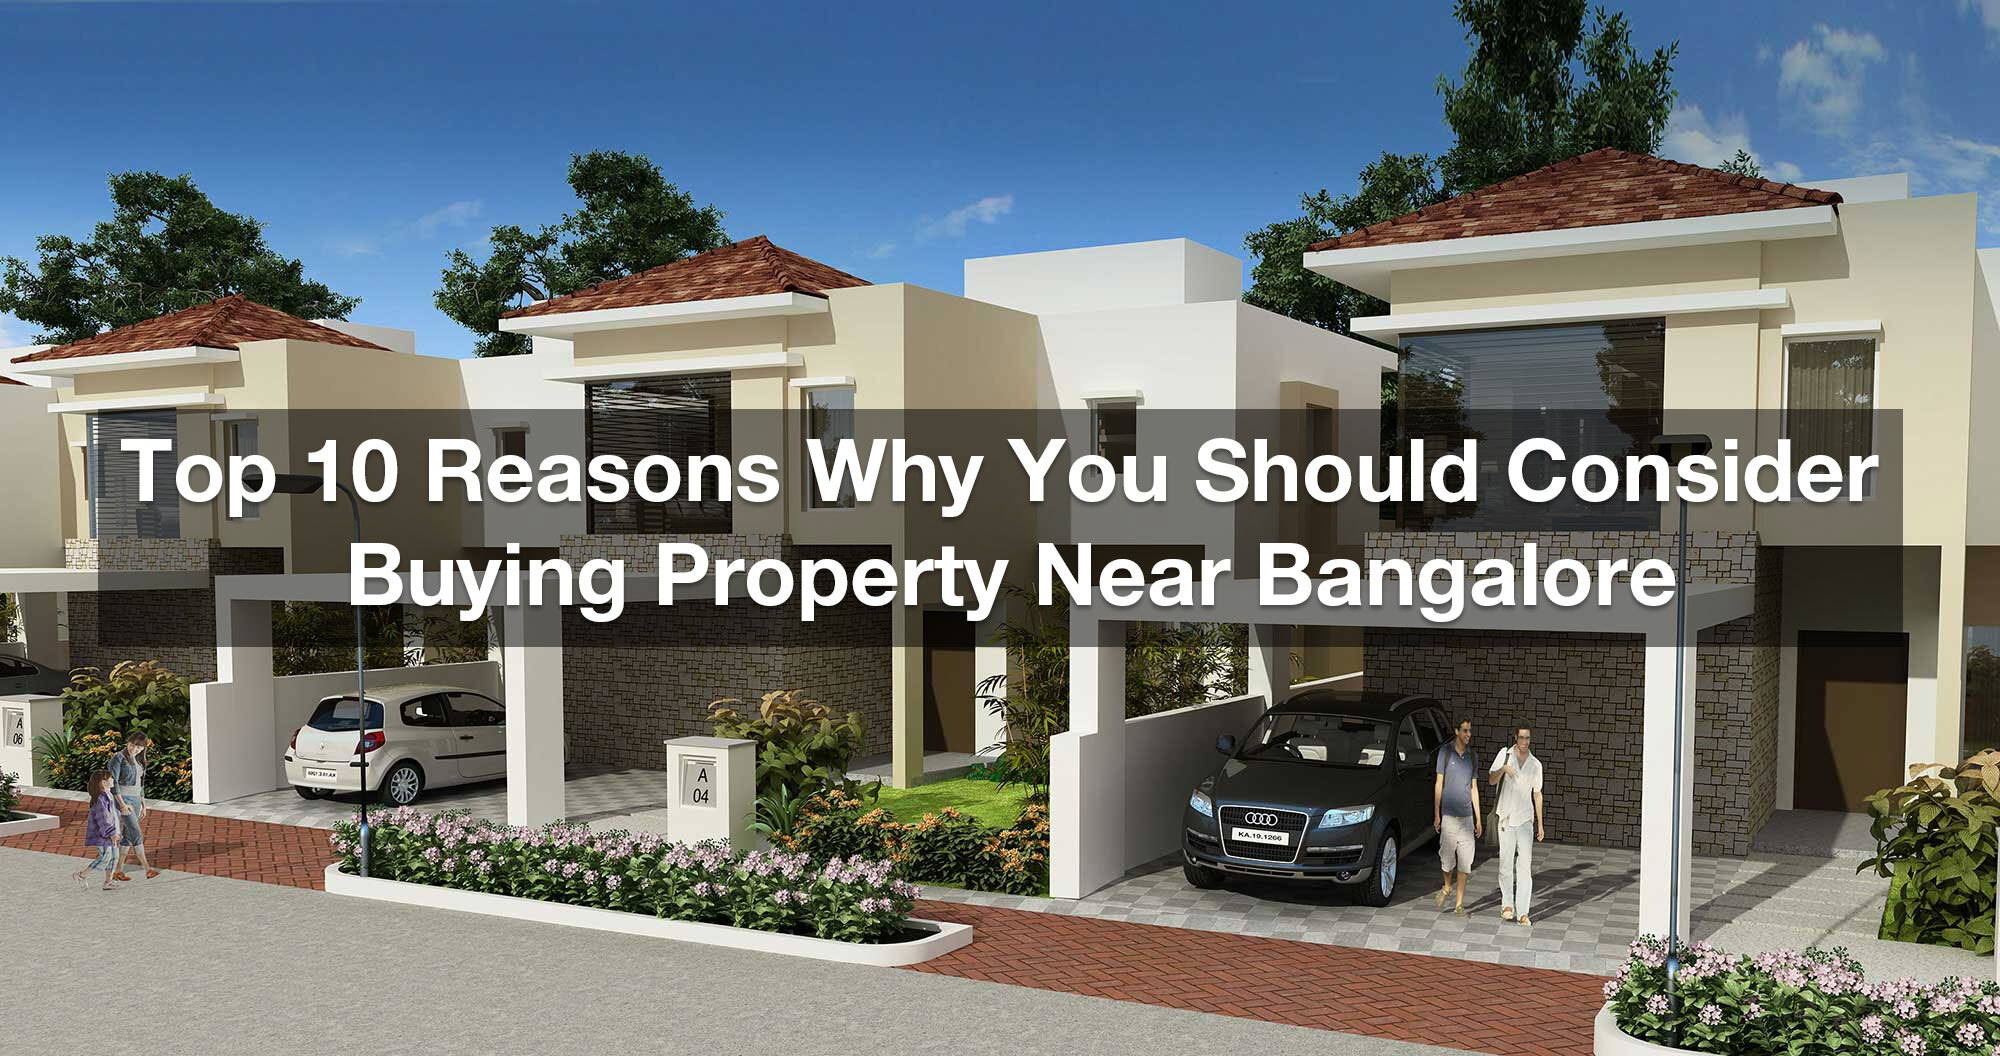 Top 10 reasons why you should consider buying property near Bangalore